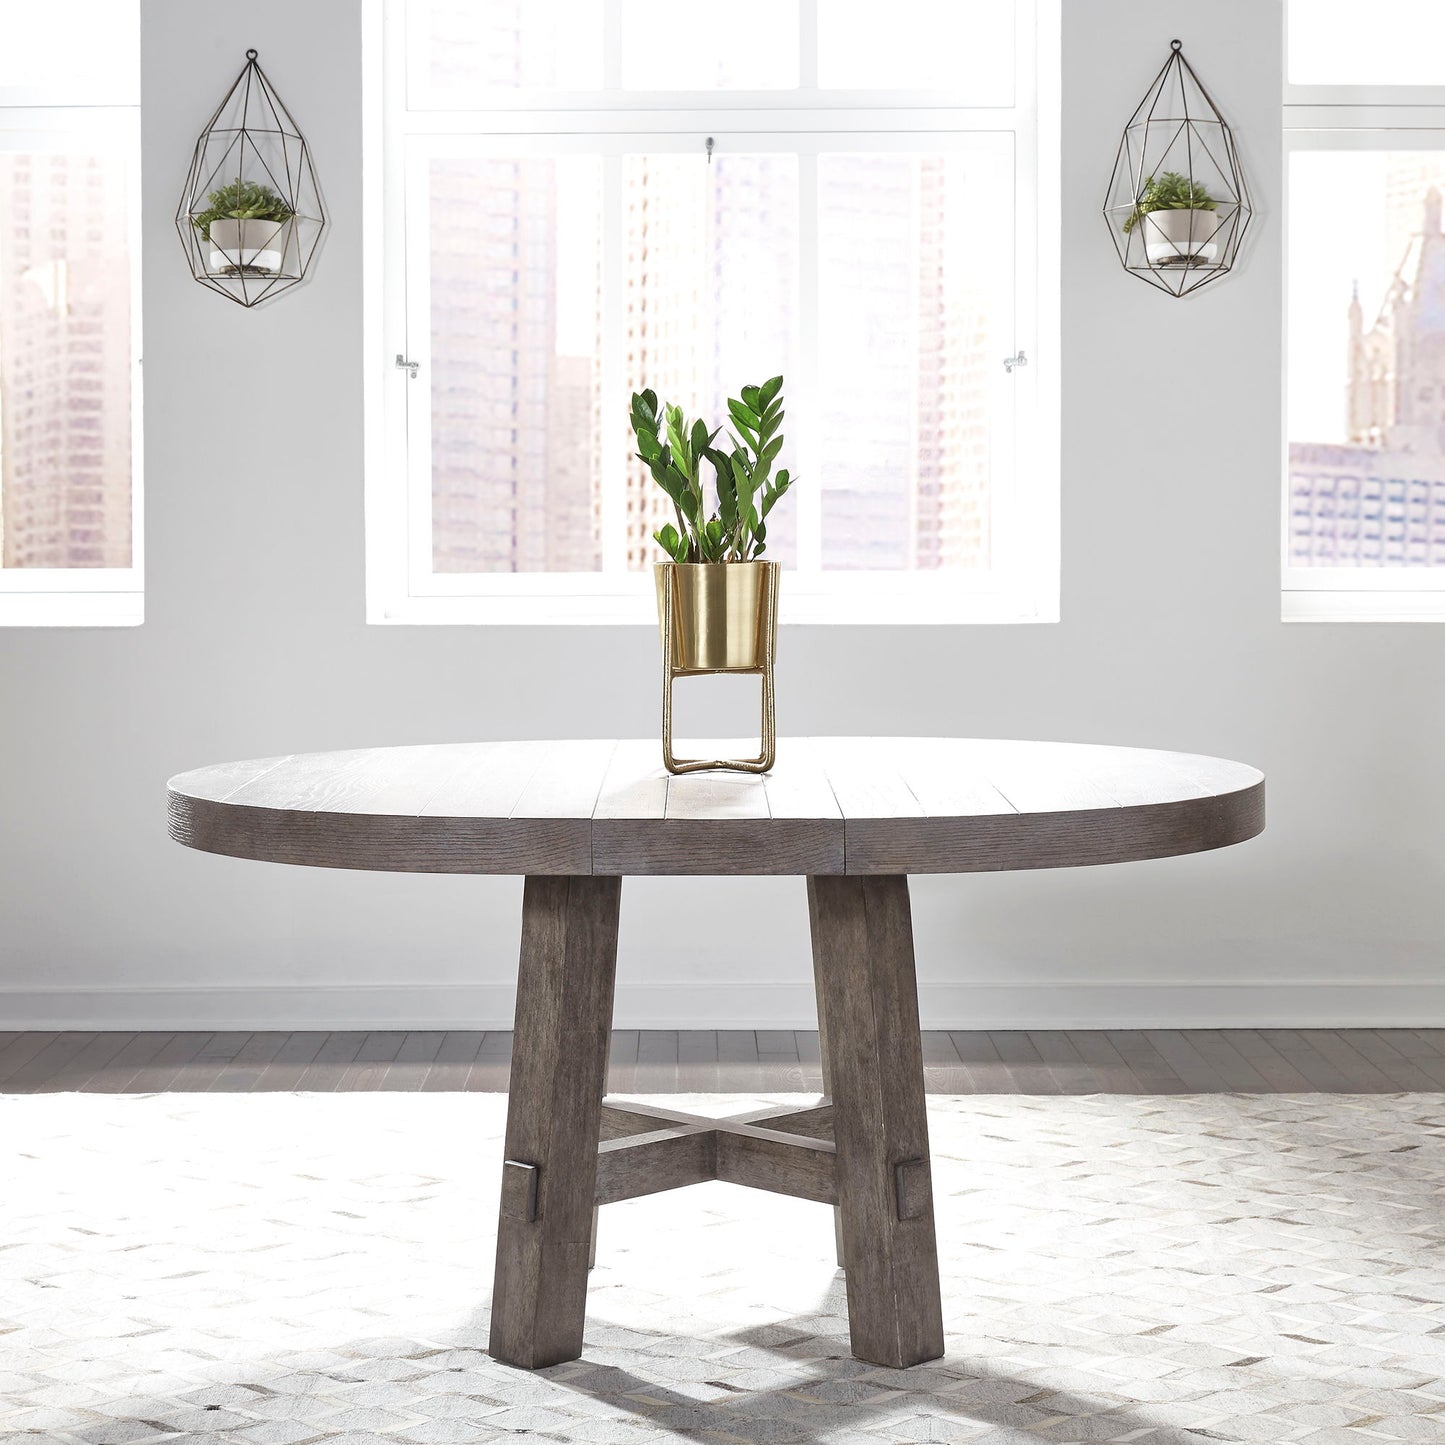 Modern Farmhouse - 5 Piece Round Table Set - Charcoal - Panel-Back Chairs